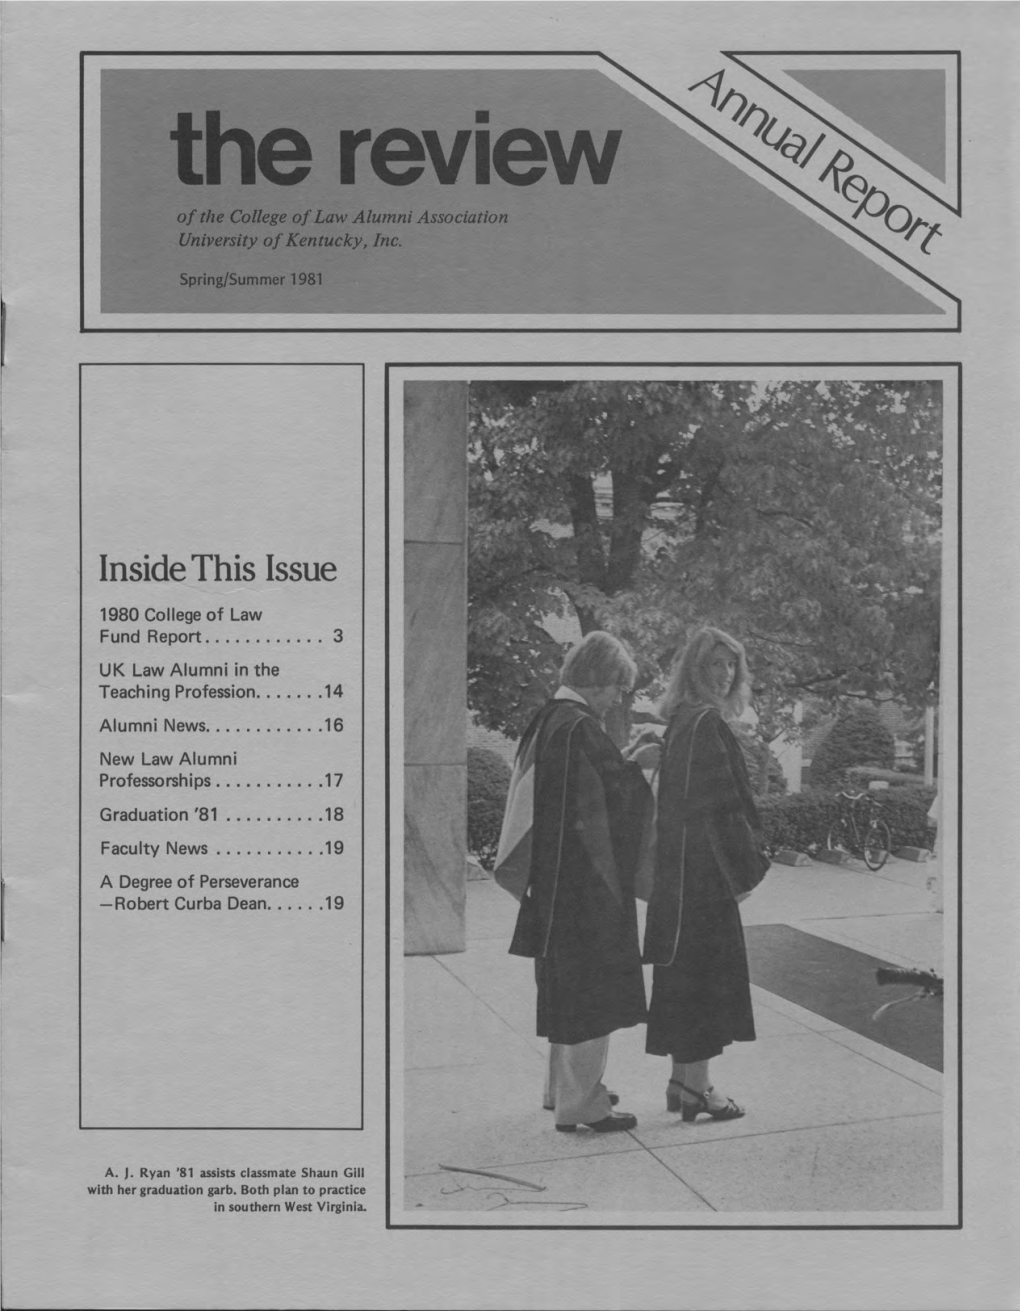 The Review of the College of Law Alumni Association, Spring 1981